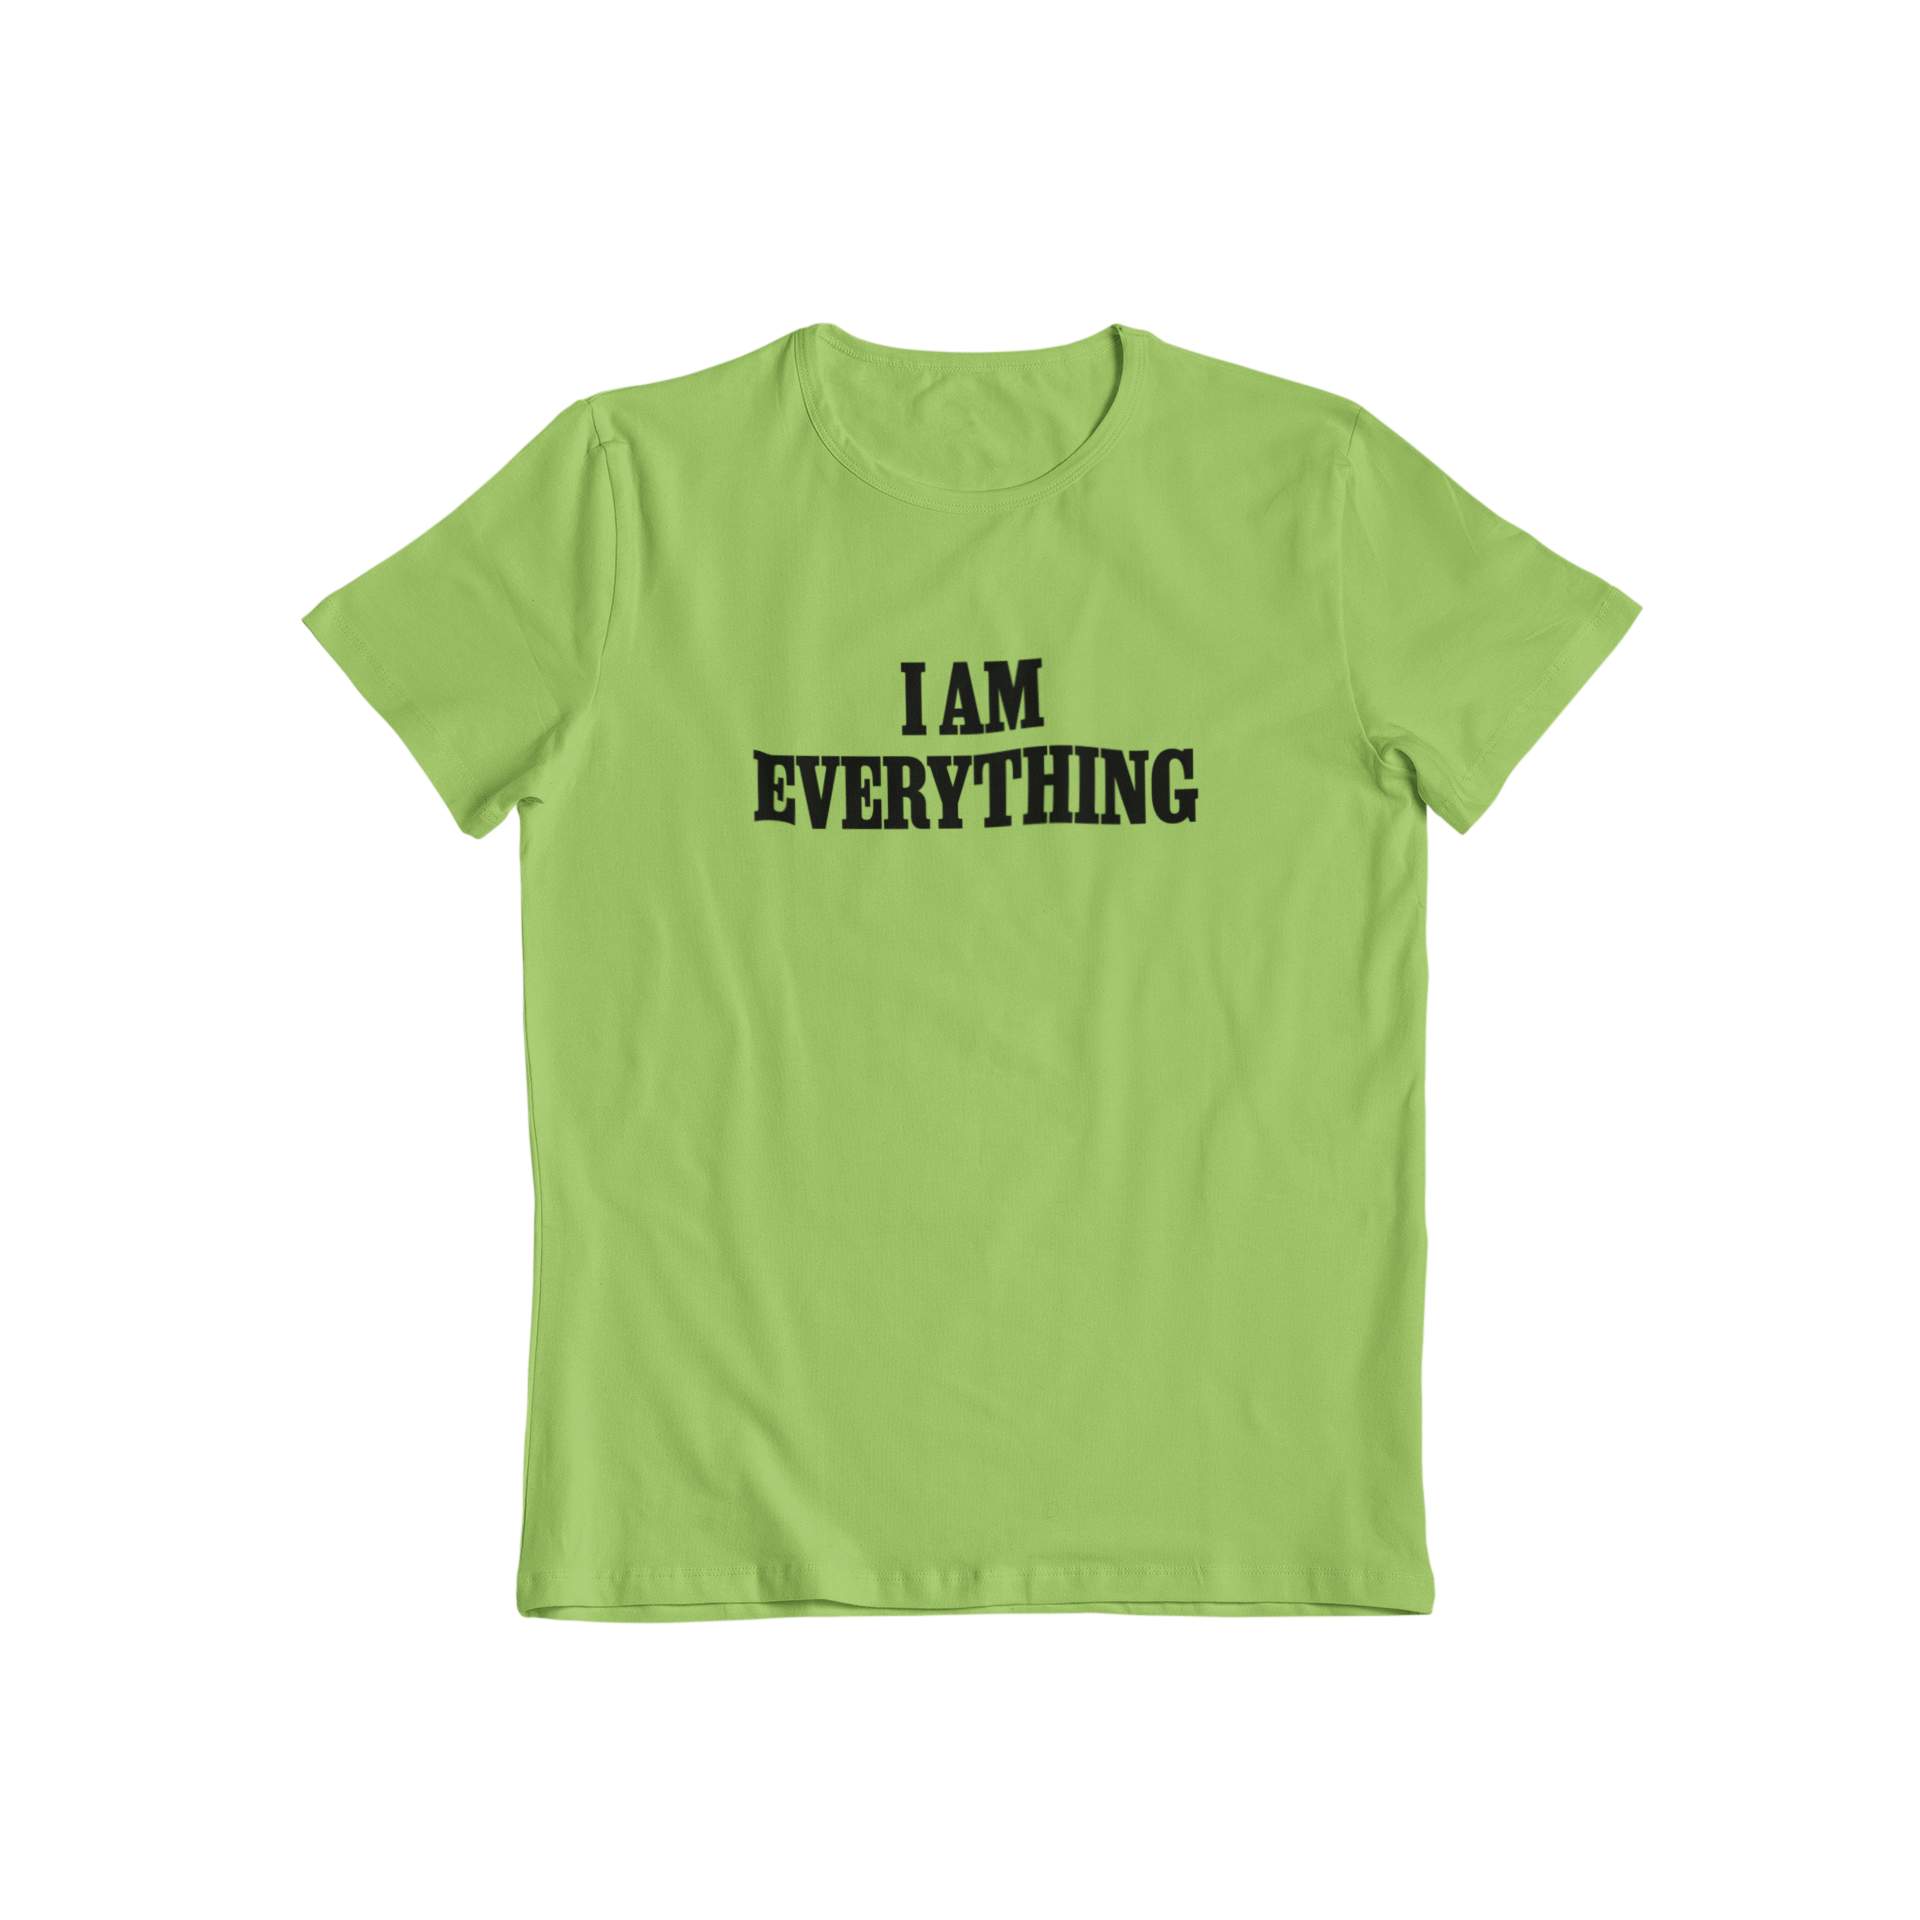 Introducing our matching slogan t-shirt, the I Am Everything T-shirt. Made with the same high quality and comfort as our I Have Everything t-shirt, this shirt is perfect for showing off your confidence and style. Get the complete look and let the world know that you truly have everything.